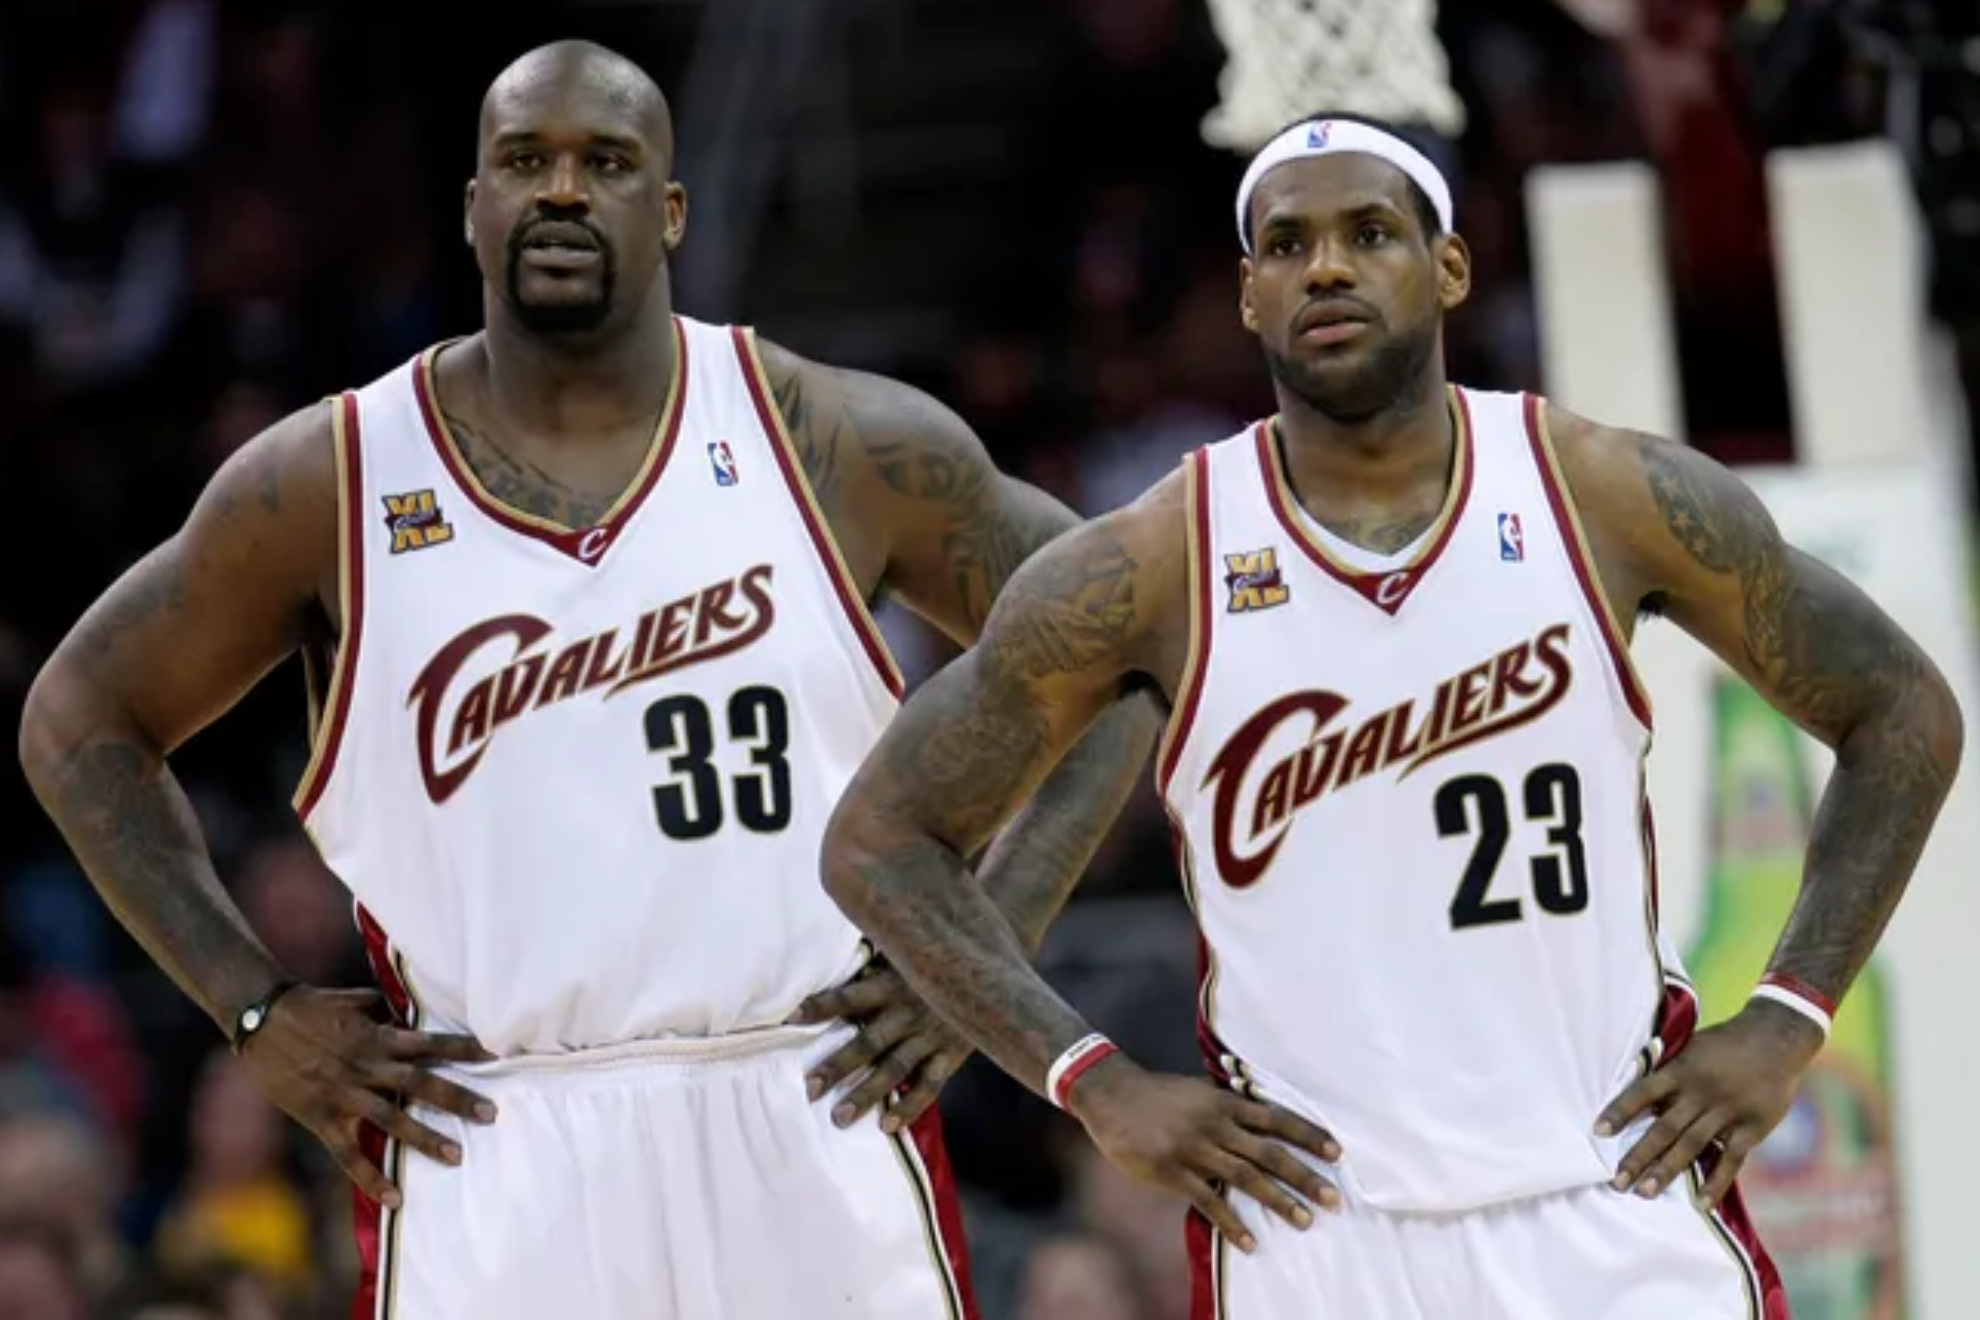 Shaquille O'Neal considers LeBron James to be the greatest of all time.